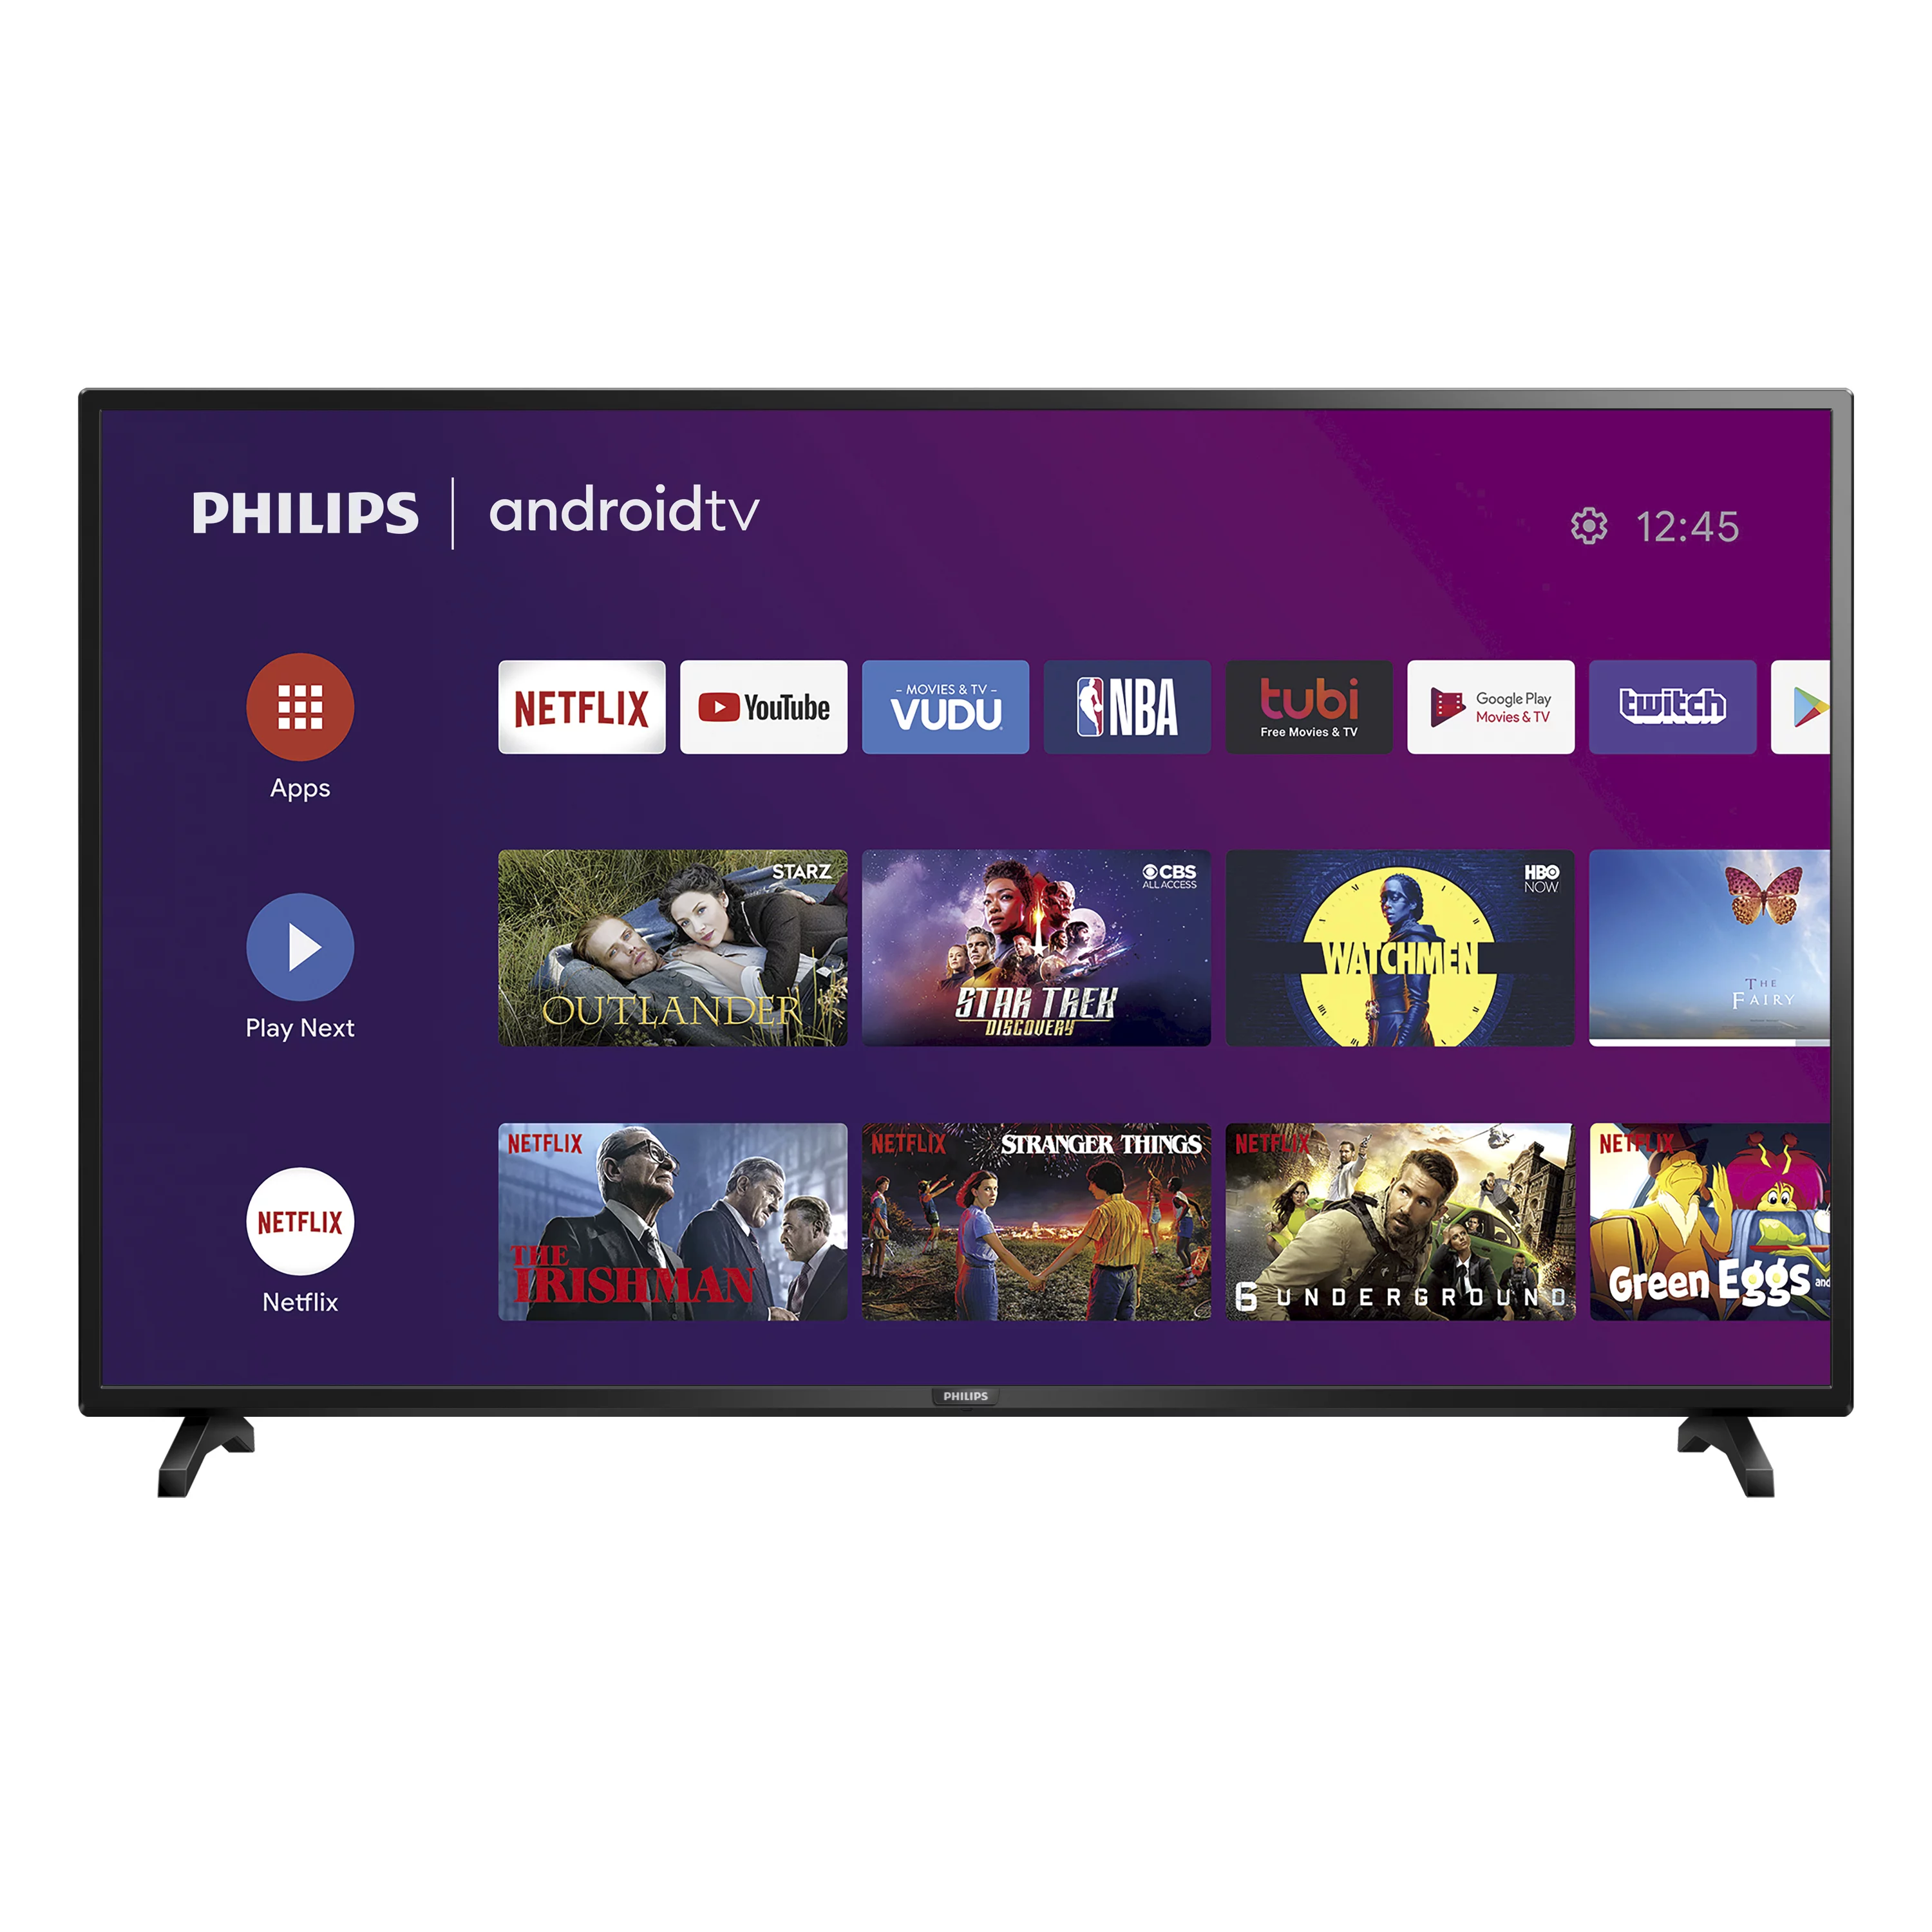 Receptor Iluminar R Philips 55" Class 4K Ultra HD (2160p) Android Smart LED TV with Google  Assistant (55PFL5604/F7) - https://dailysavesonline.com